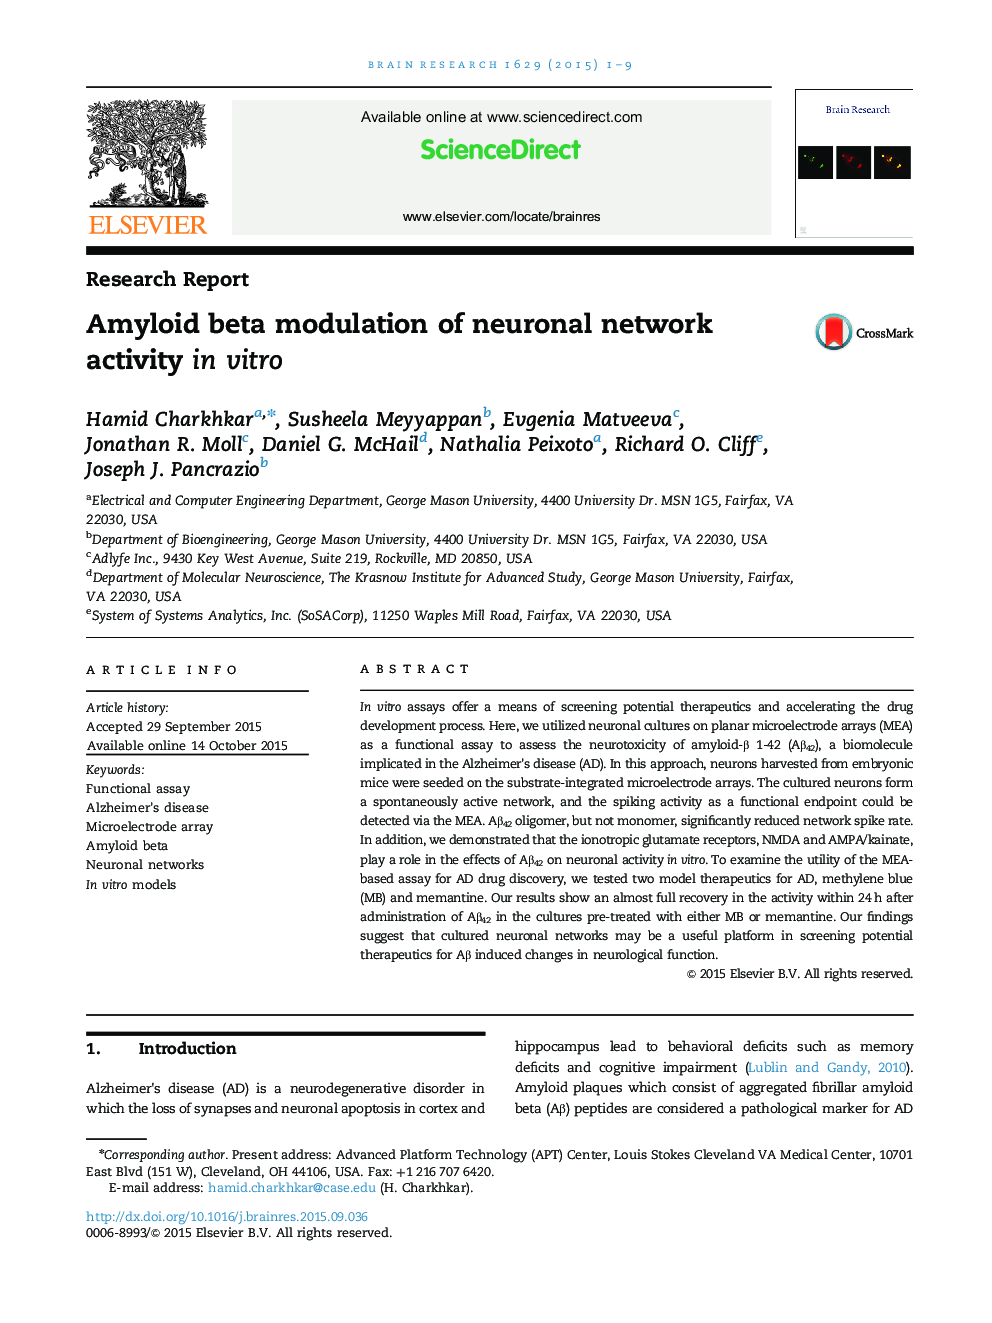 Research ReportAmyloid beta modulation of neuronal network activity in vitro